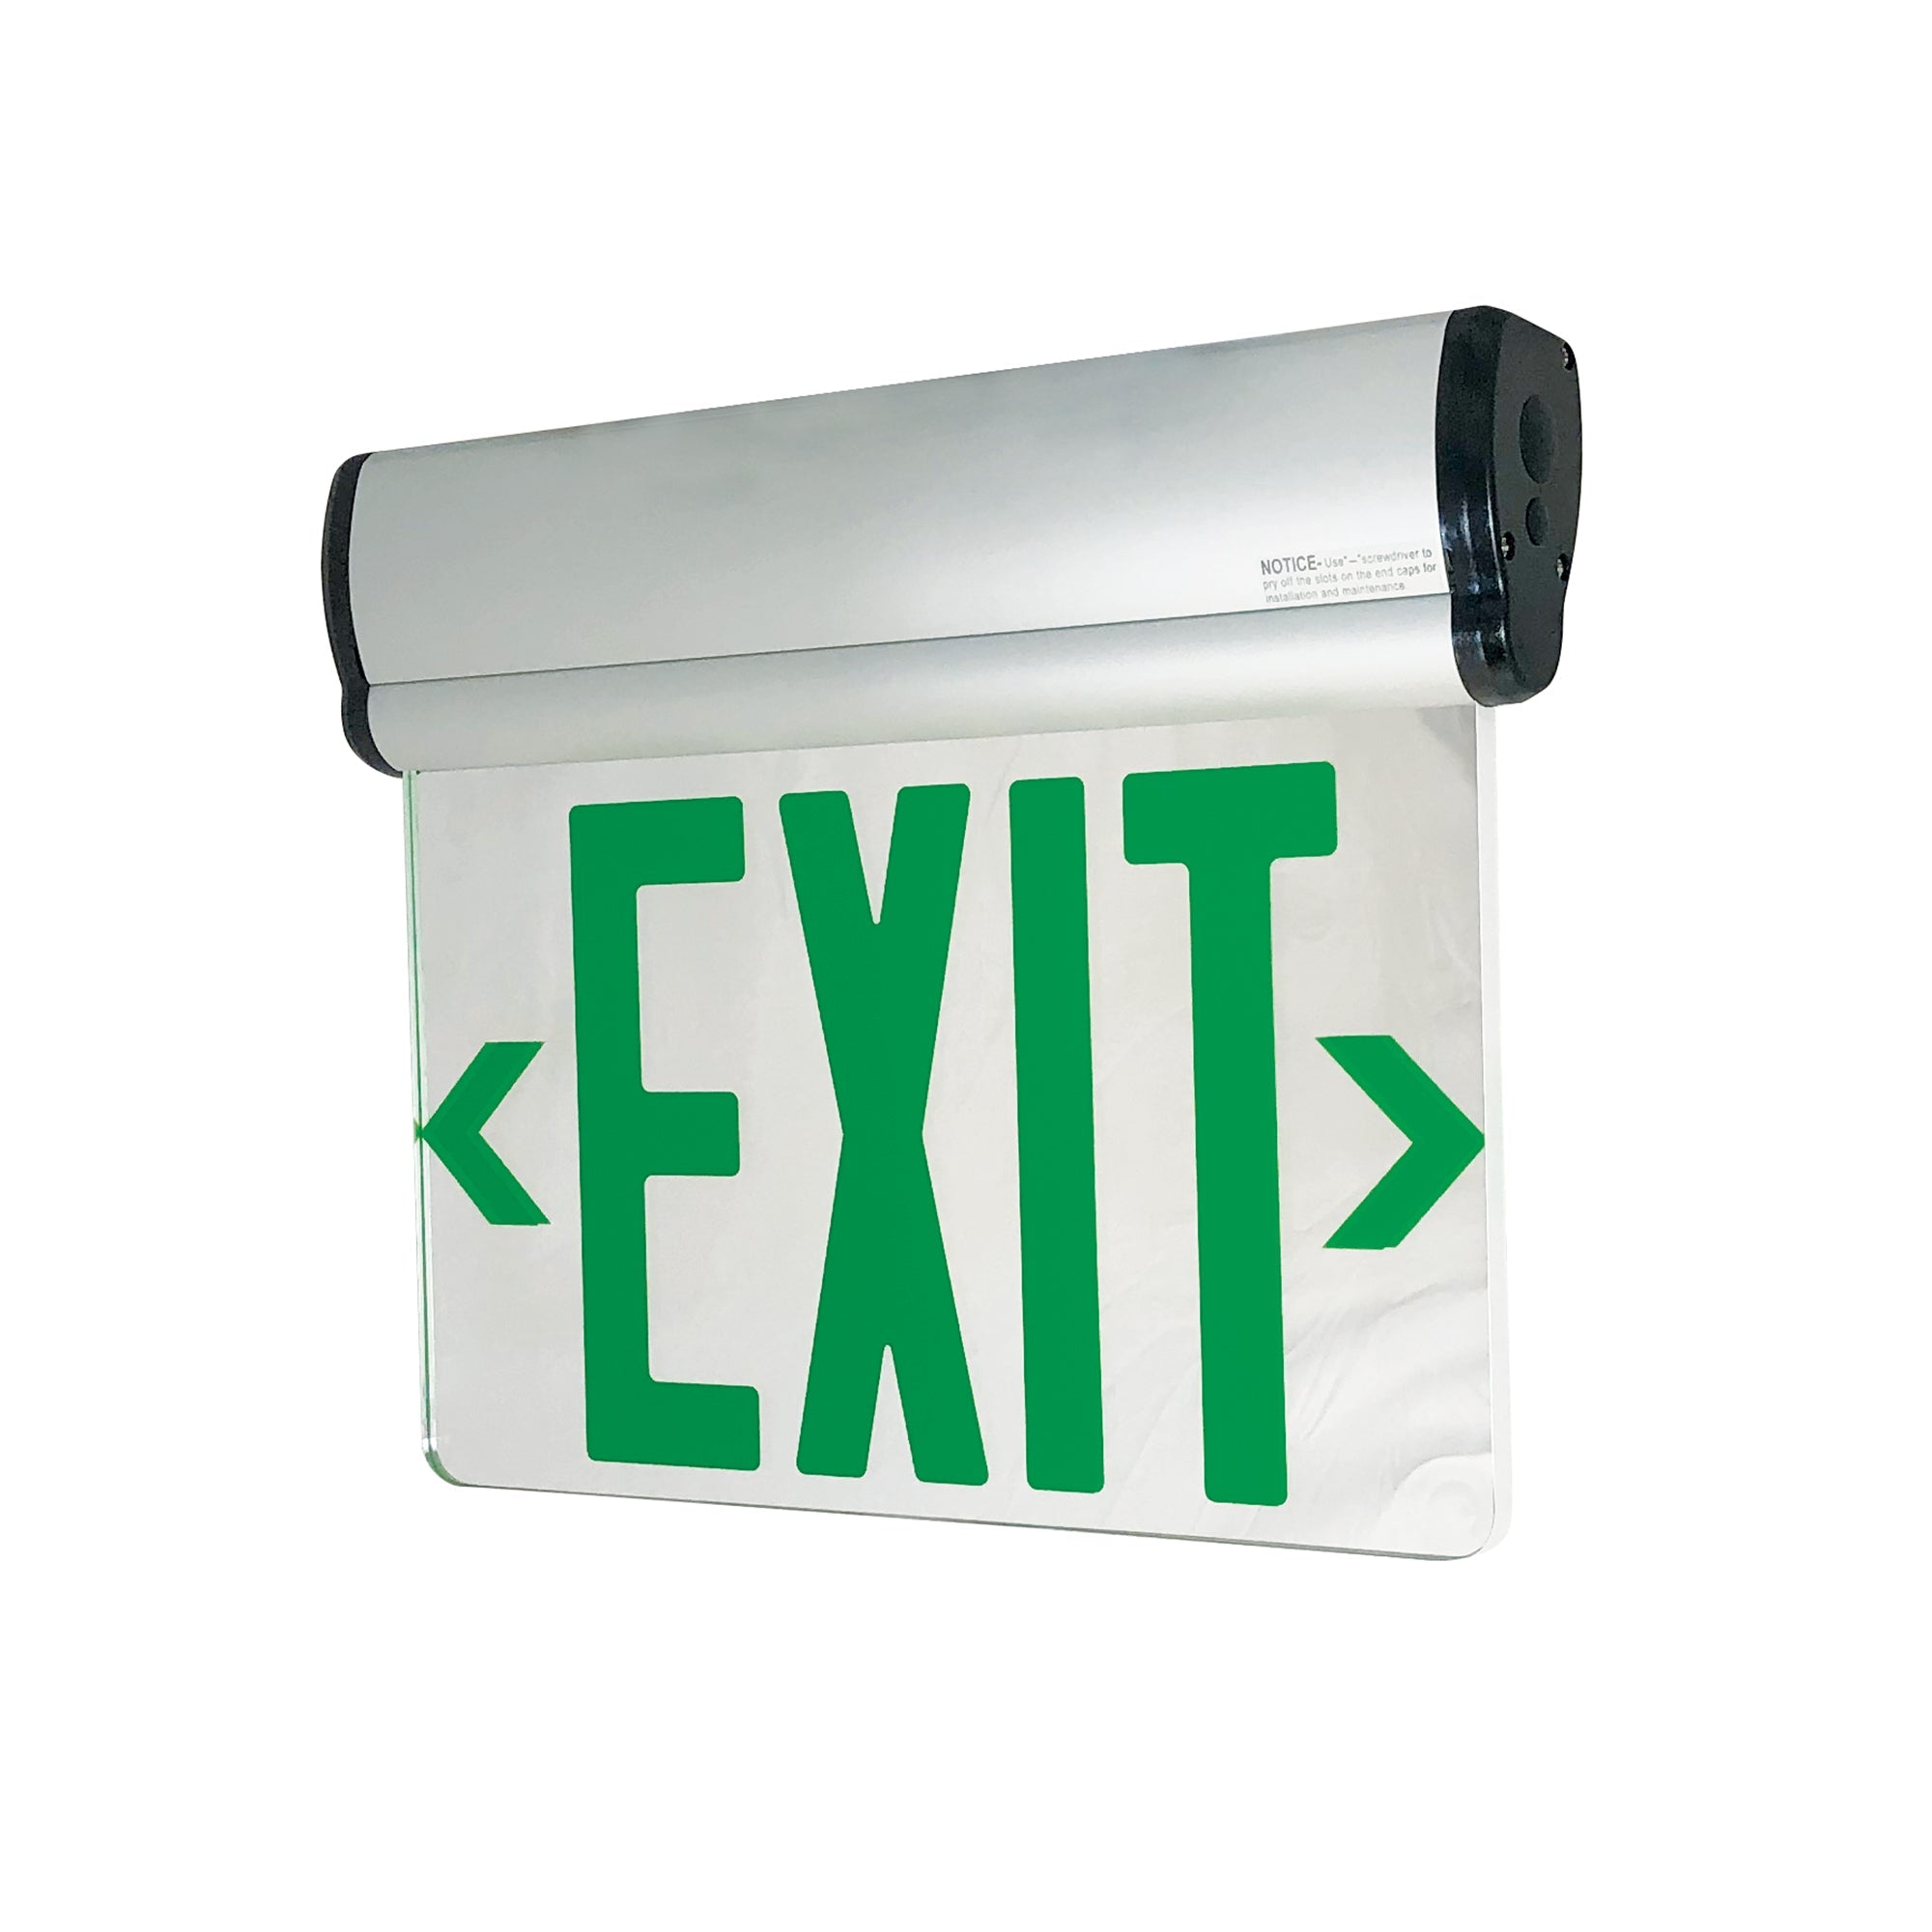 Nora Lighting NX-811-LEDG2MA - Exit / Emergency - Surface Adjustable LED Edge-Lit Exit Sign, 2 Circuit, 6 Inch Green Letters, Double Face / Mirrored Acrylic, Aluminum Housing